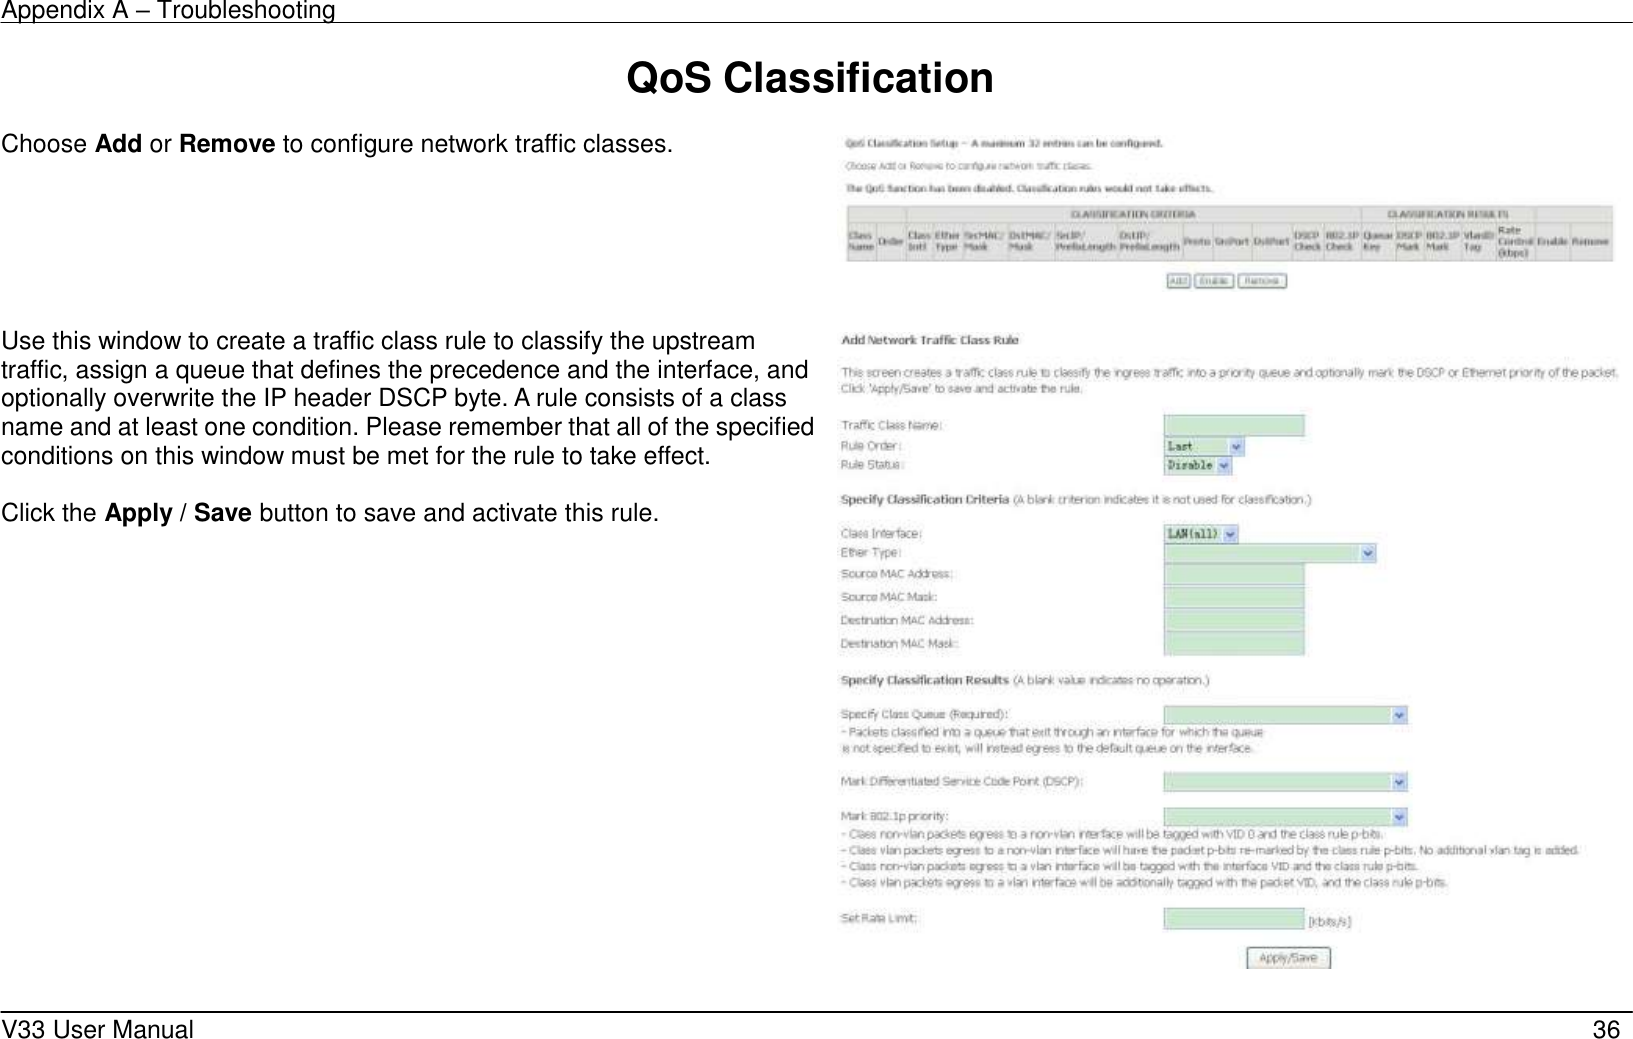 Appendix A – Troubleshooting    V33 User Manual   36 QoS Classification  Choose Add or Remove to configure network traffic classes.       Use this window to create a traffic class rule to classify the upstream traffic, assign a queue that defines the precedence and the interface, and optionally overwrite the IP header DSCP byte. A rule consists of a class name and at least one condition. Please remember that all of the specified conditions on this window must be met for the rule to take effect.  Click the Apply / Save button to save and activate this rule.      